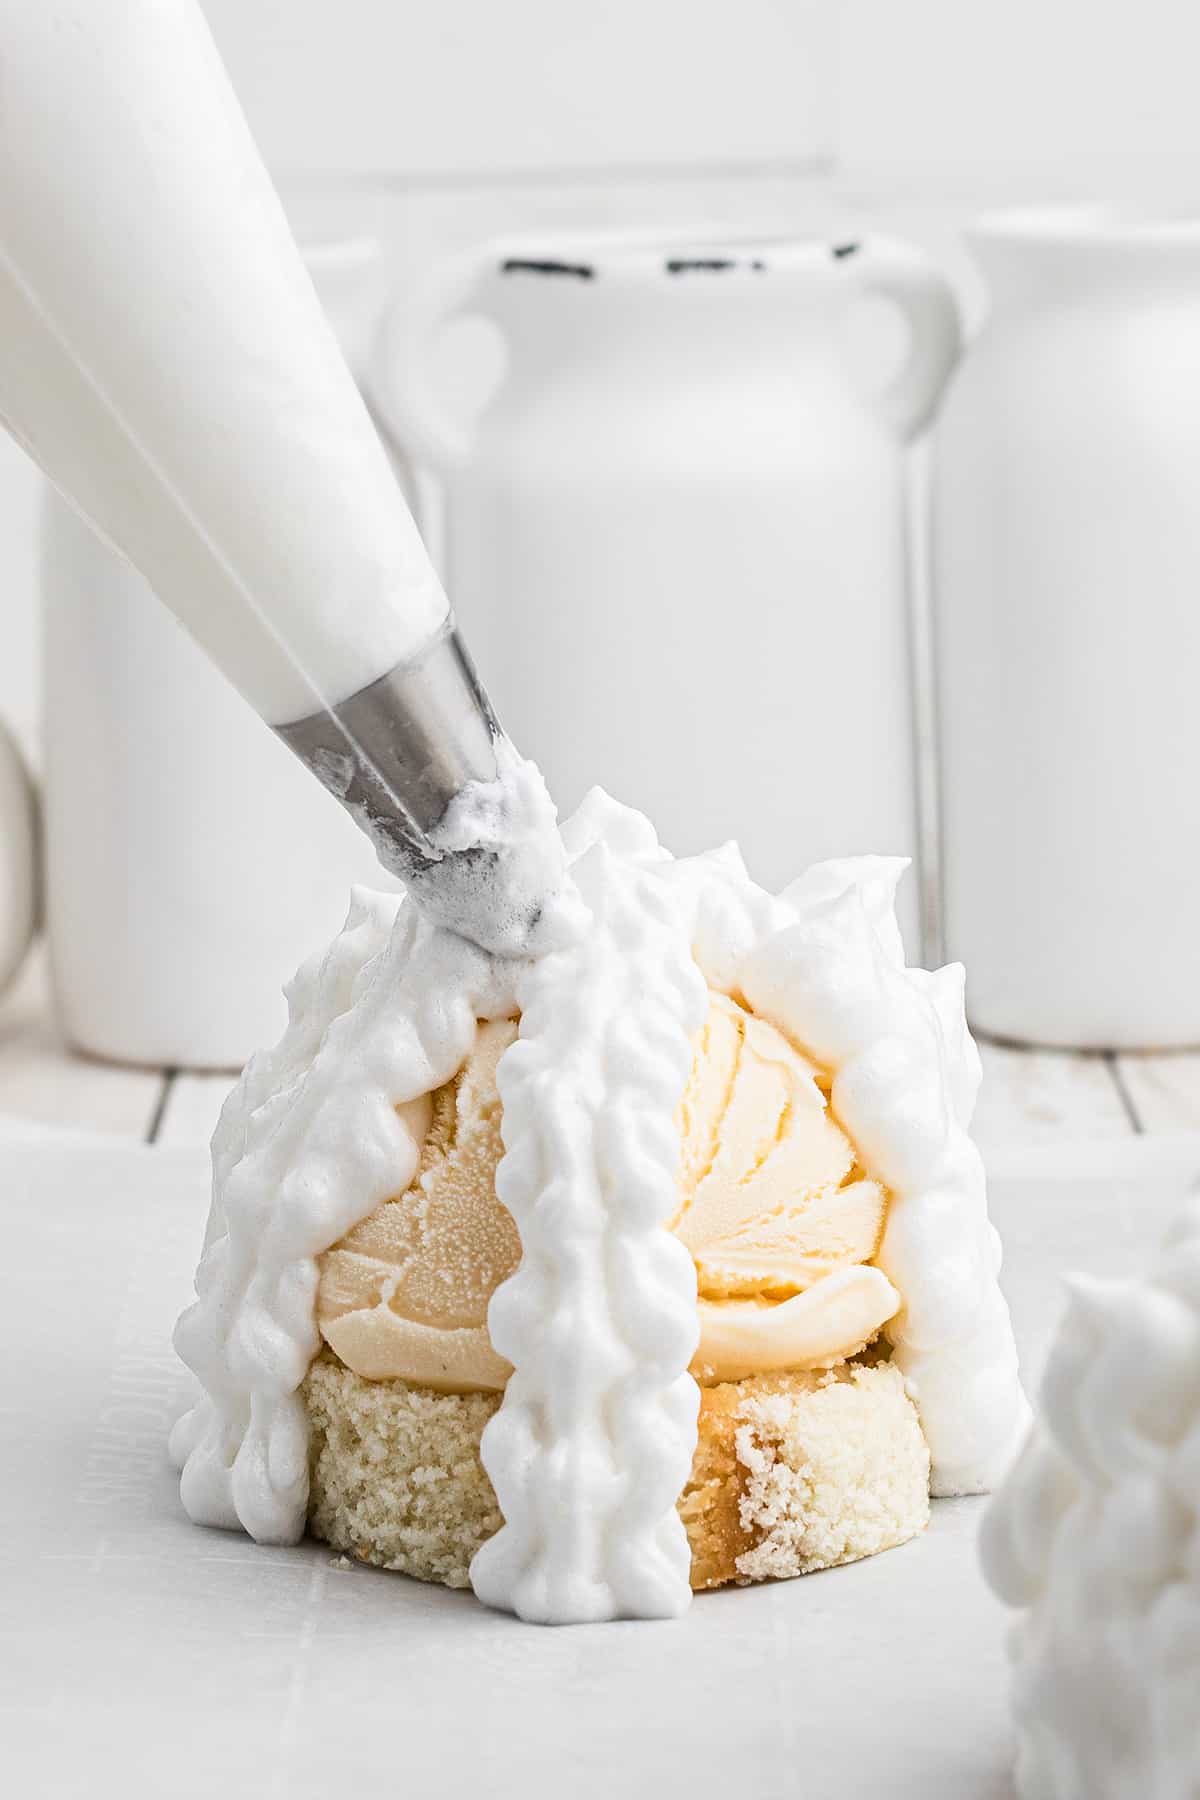 Piping meringue over the ice cream and cake.